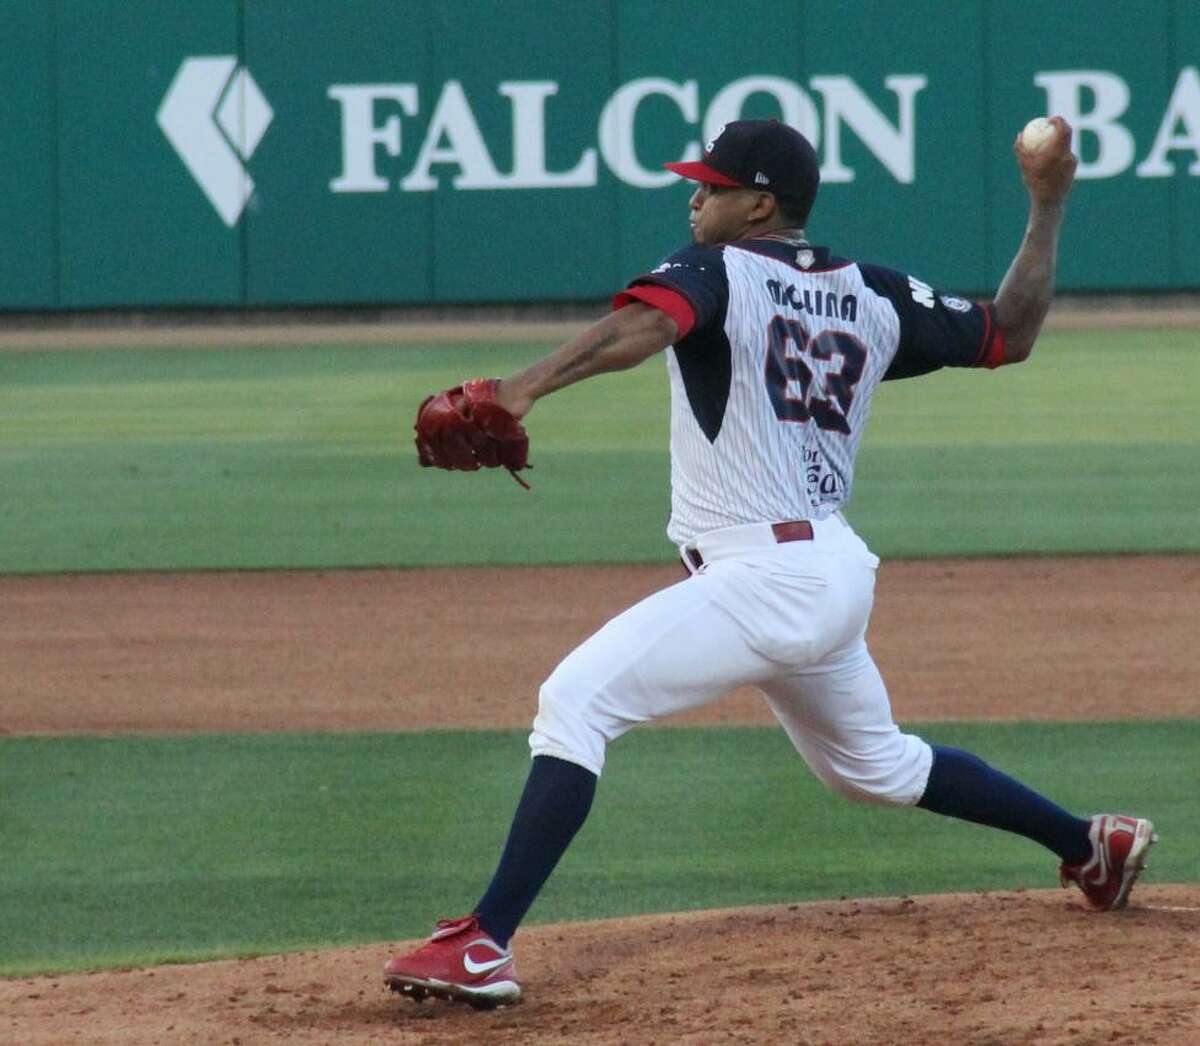 Nestor Molina’s 17-inning scoreless streak to begin 2018 was snapped in a big way as the Tecolotes’ reigning 2017 ERA champion was tagged for eight runs in the fifth and sixth innings Tuesday as the Tecos lost their fifth straight falling 10-5.